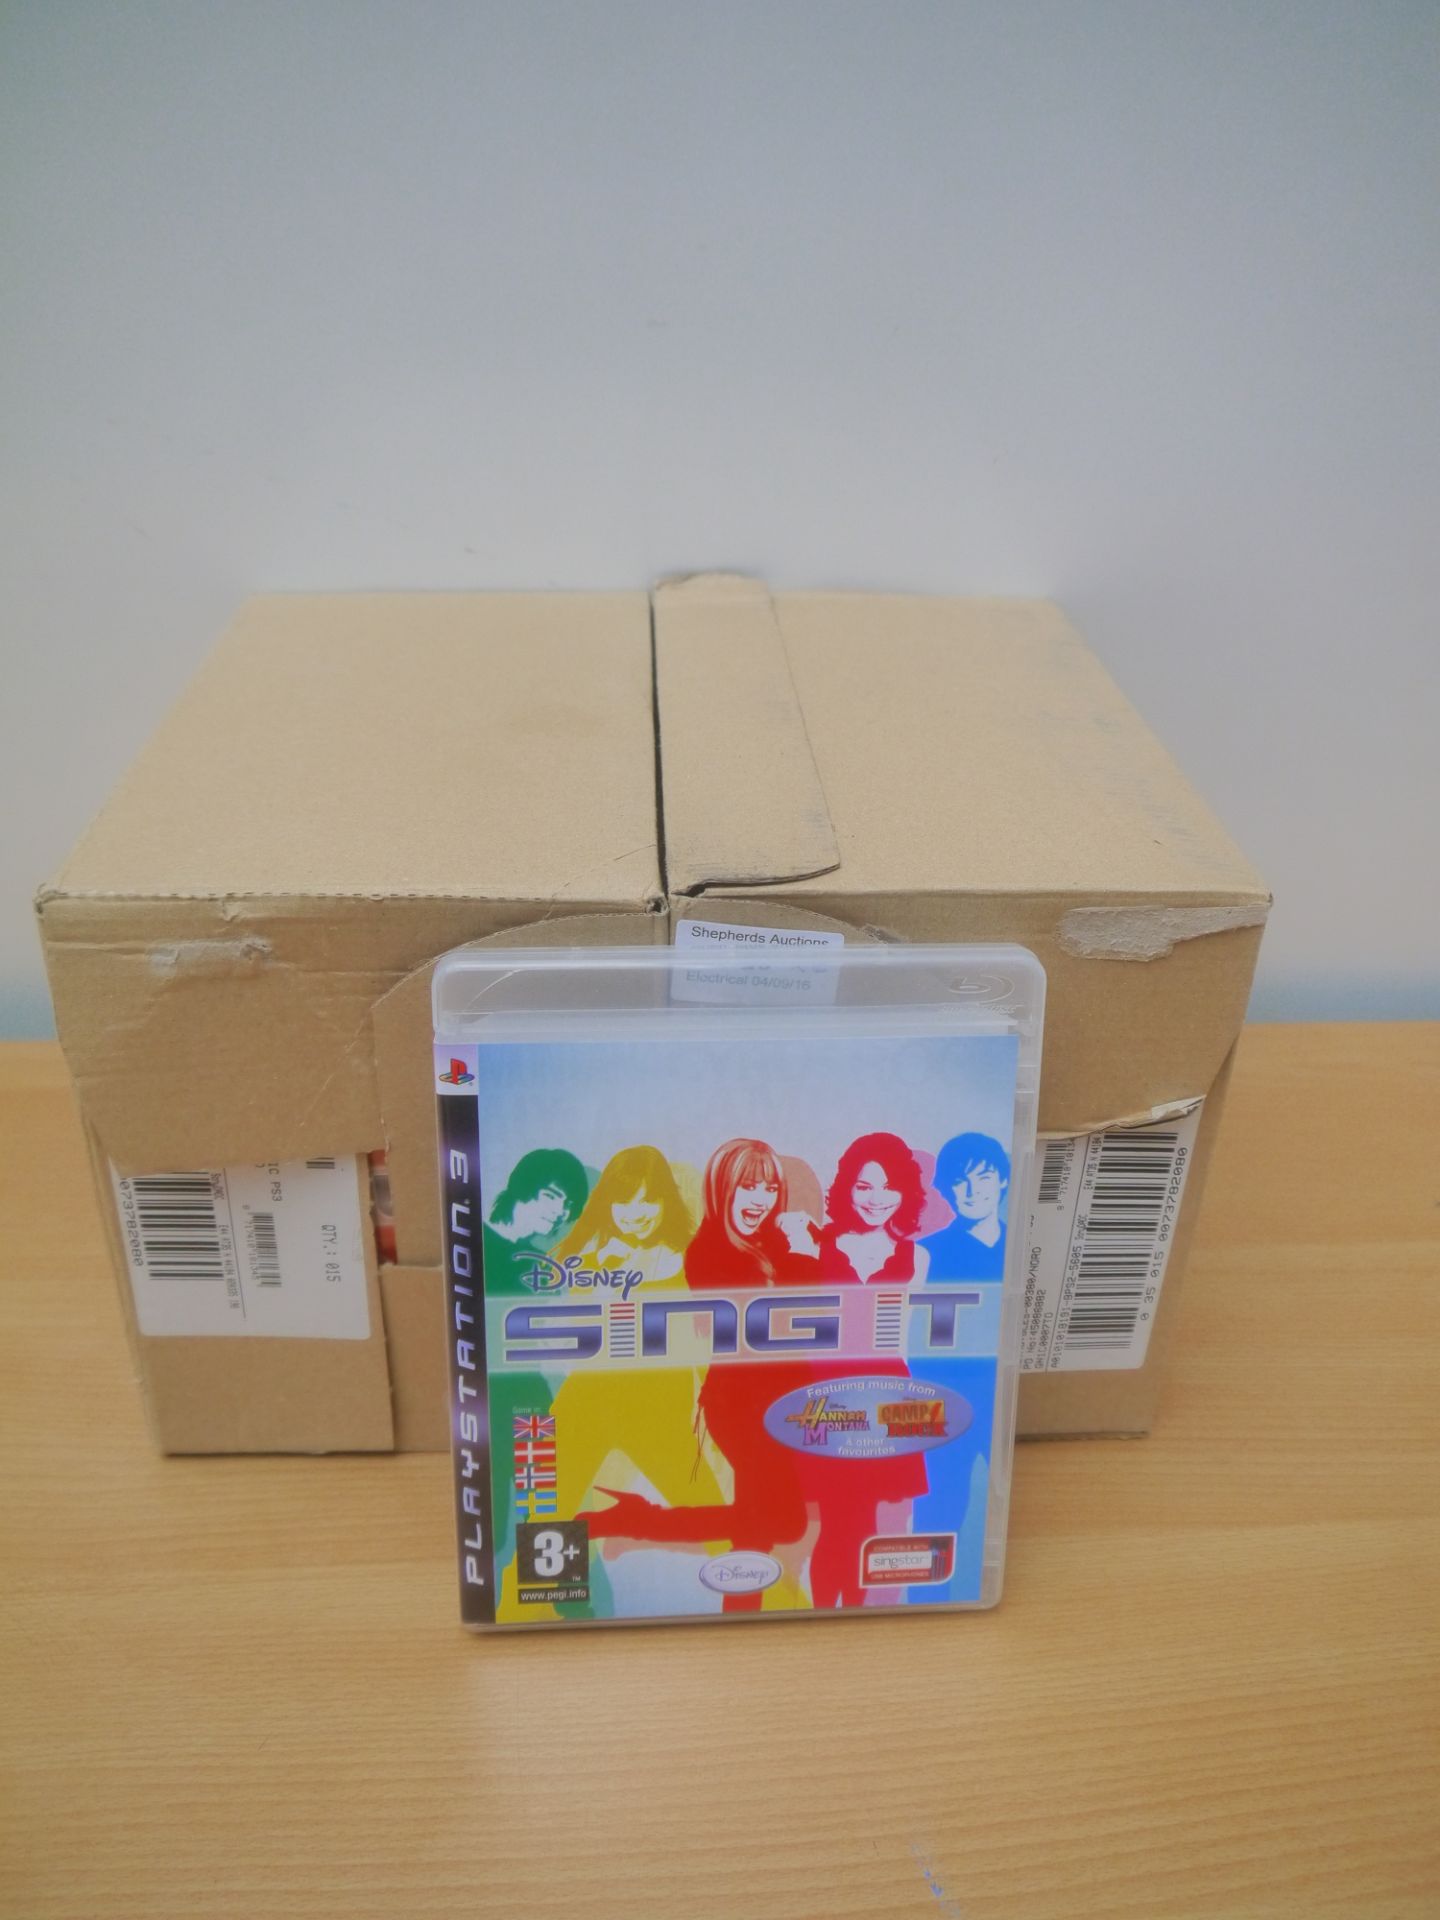 2x Boxes, each containing 15x Disney Sing It Hannah Montana, Camp Rock and more for PlayStation 3.